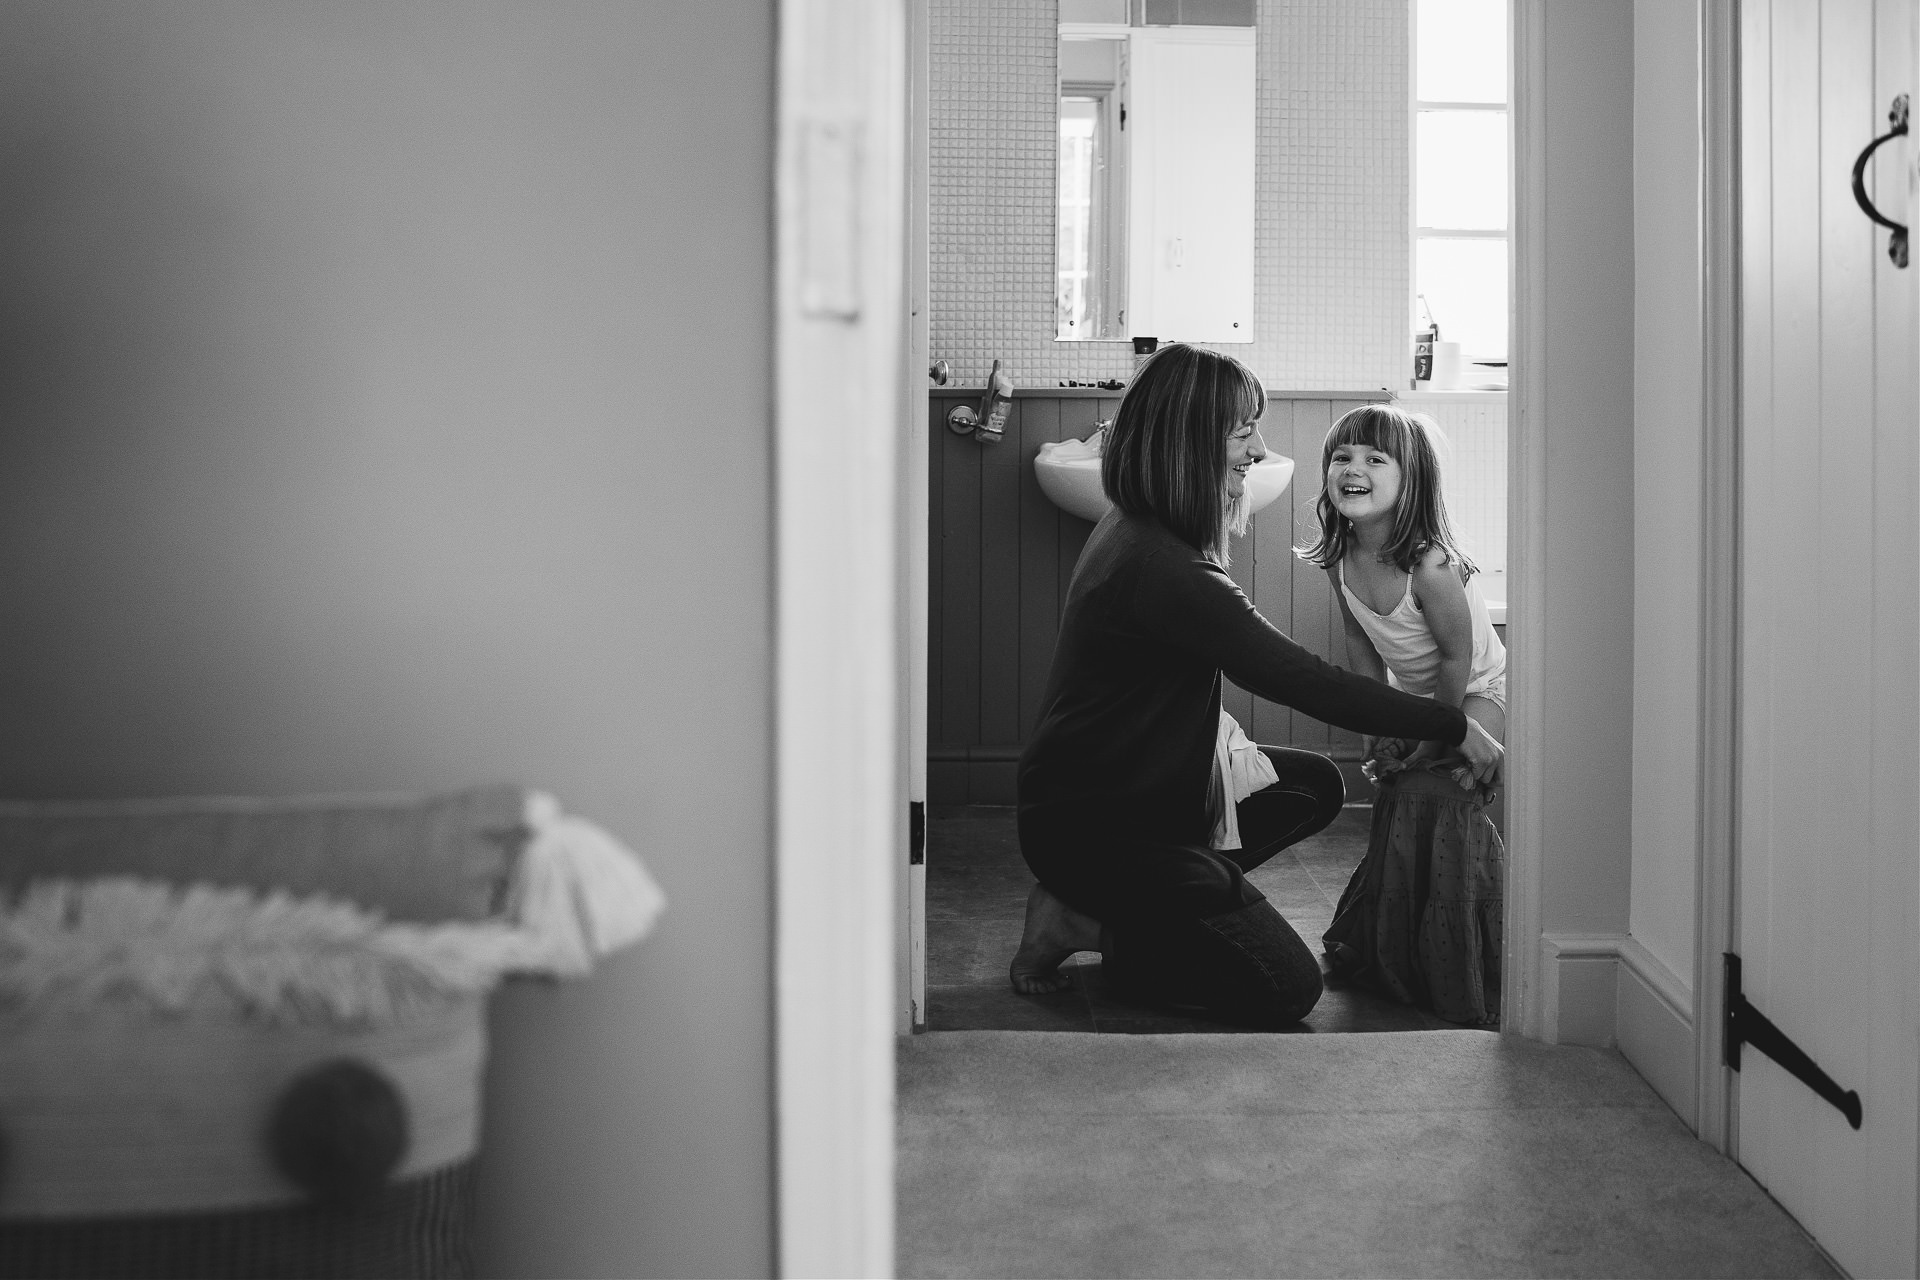 A young girl and her mother smiling and getting ready in a bathroom